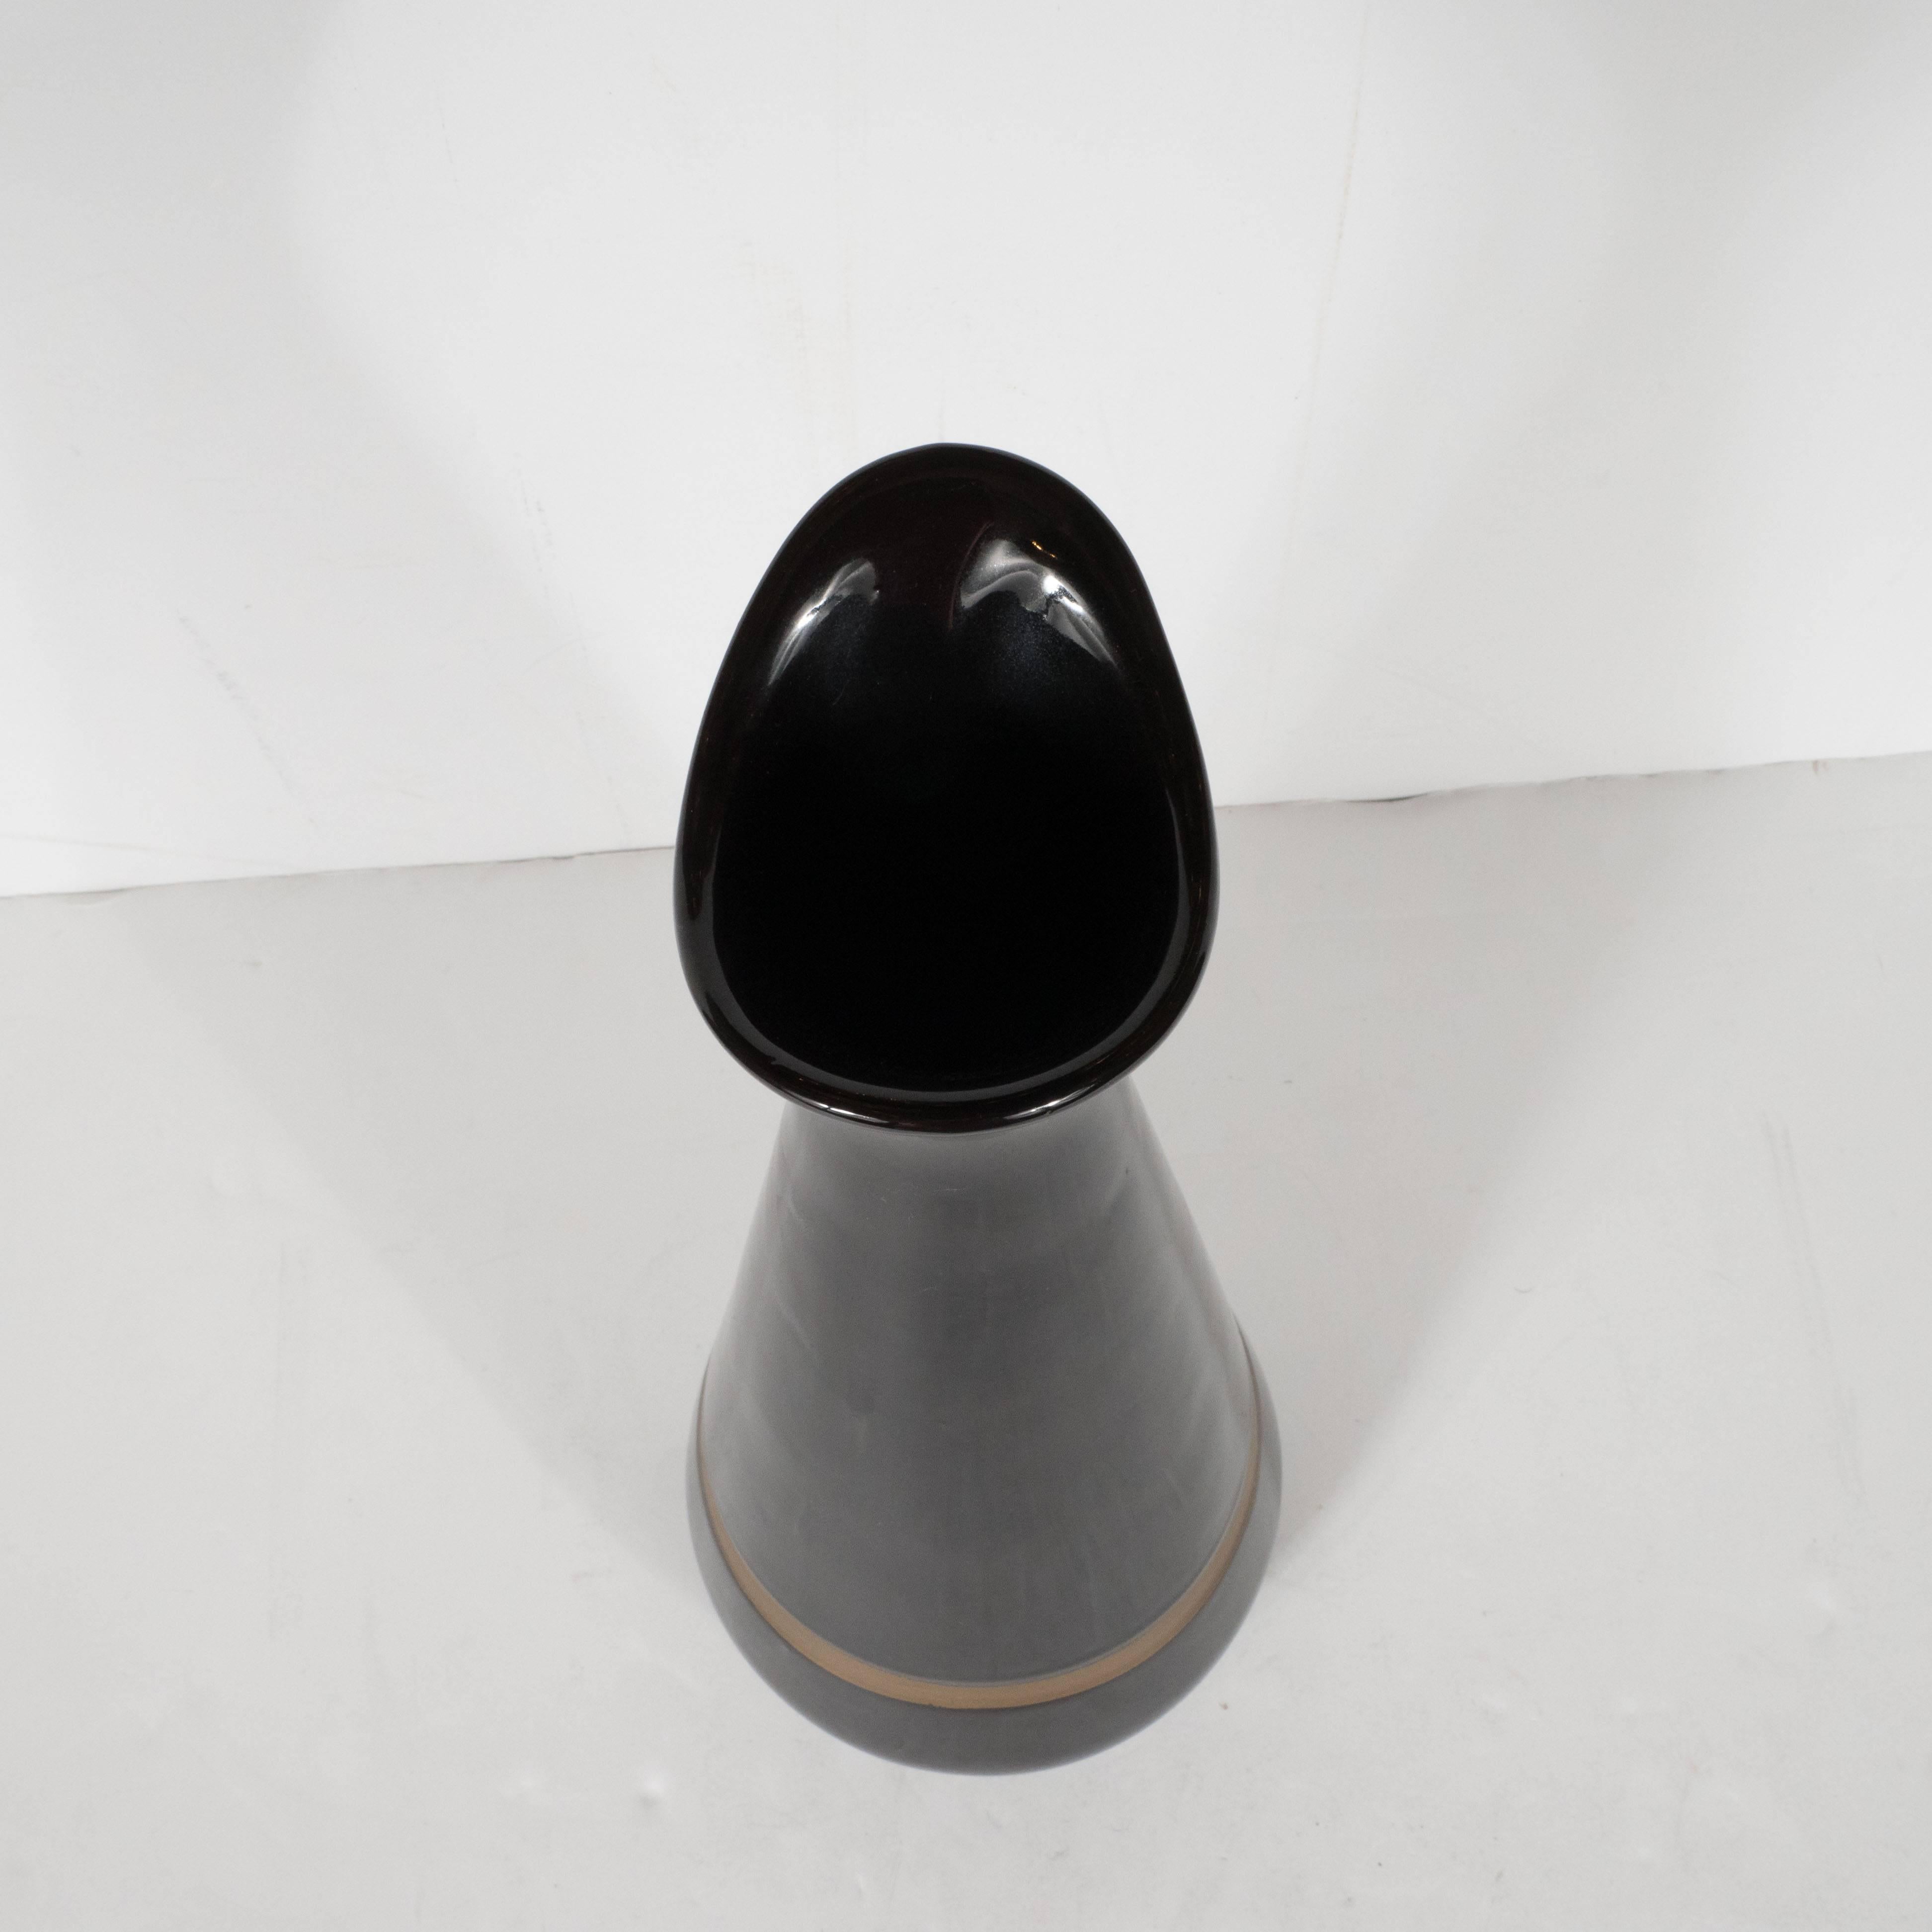 Glazed Mid-Century Modernist Hourglass Black Ceramic Vase with Gold Band, Hull Pottery